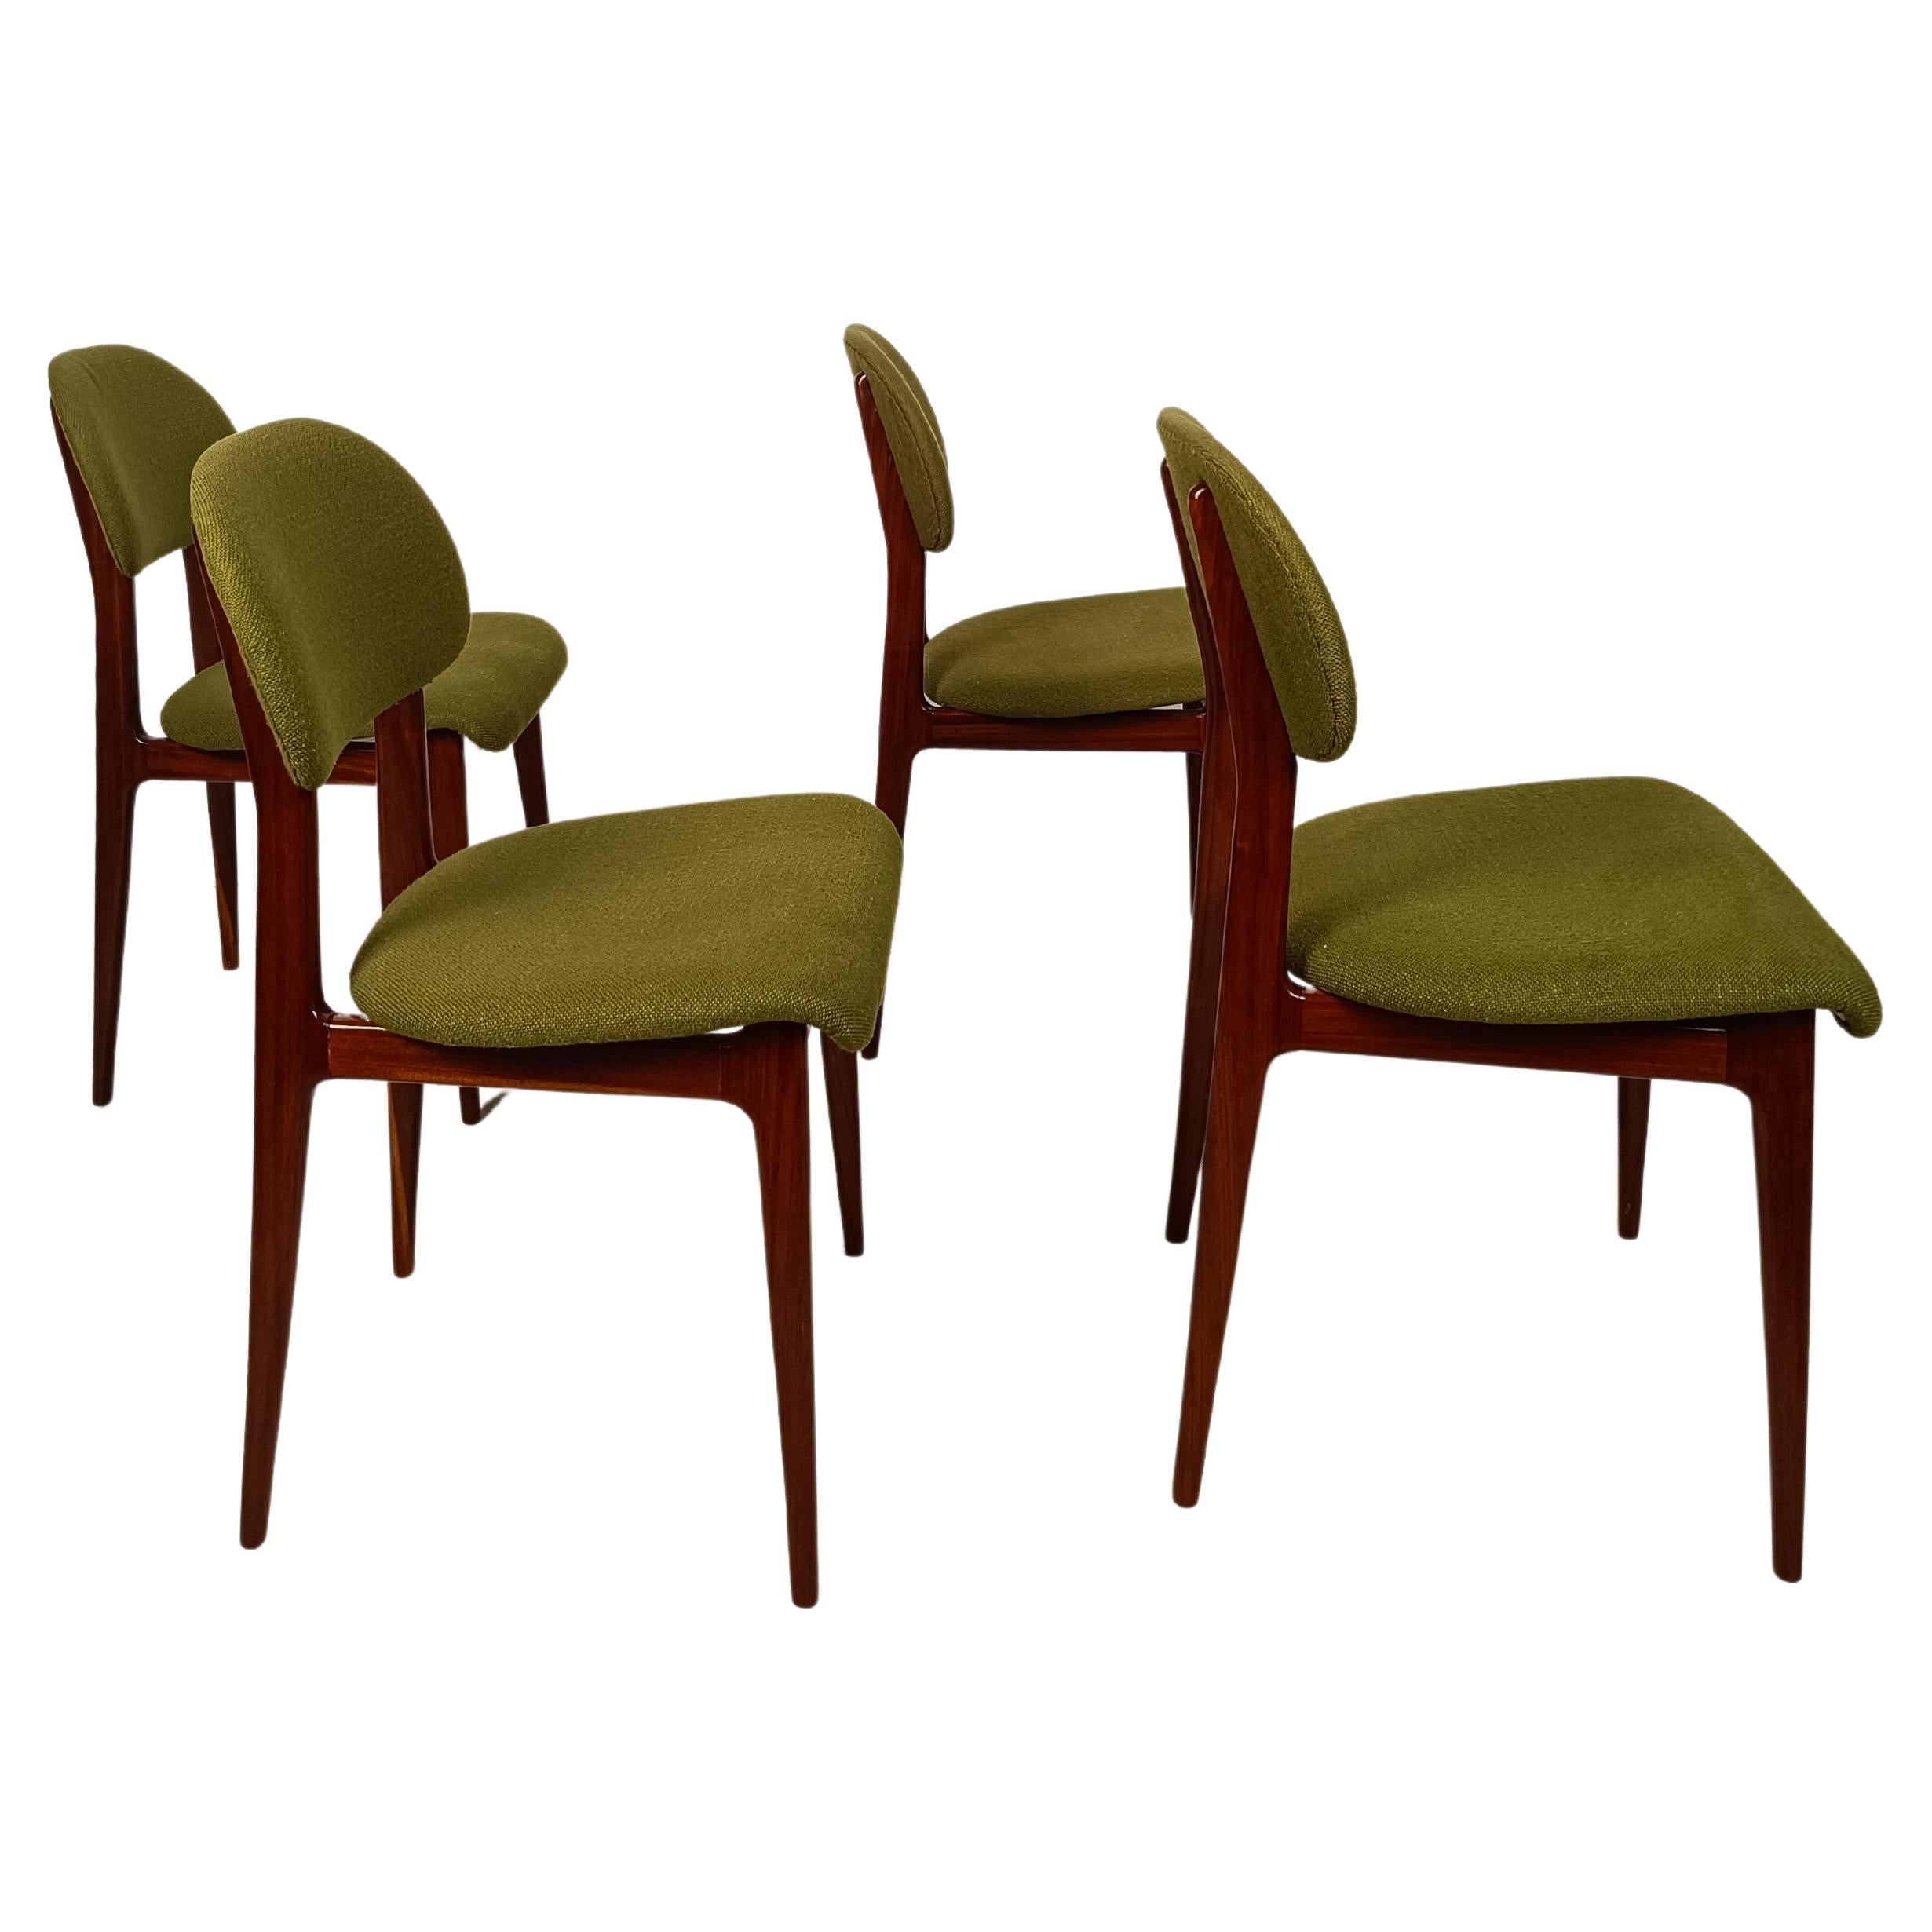 Italian Midcentury Chairs Attributed to Carlo Hauner and Martin Eisler, 1960s For Sale